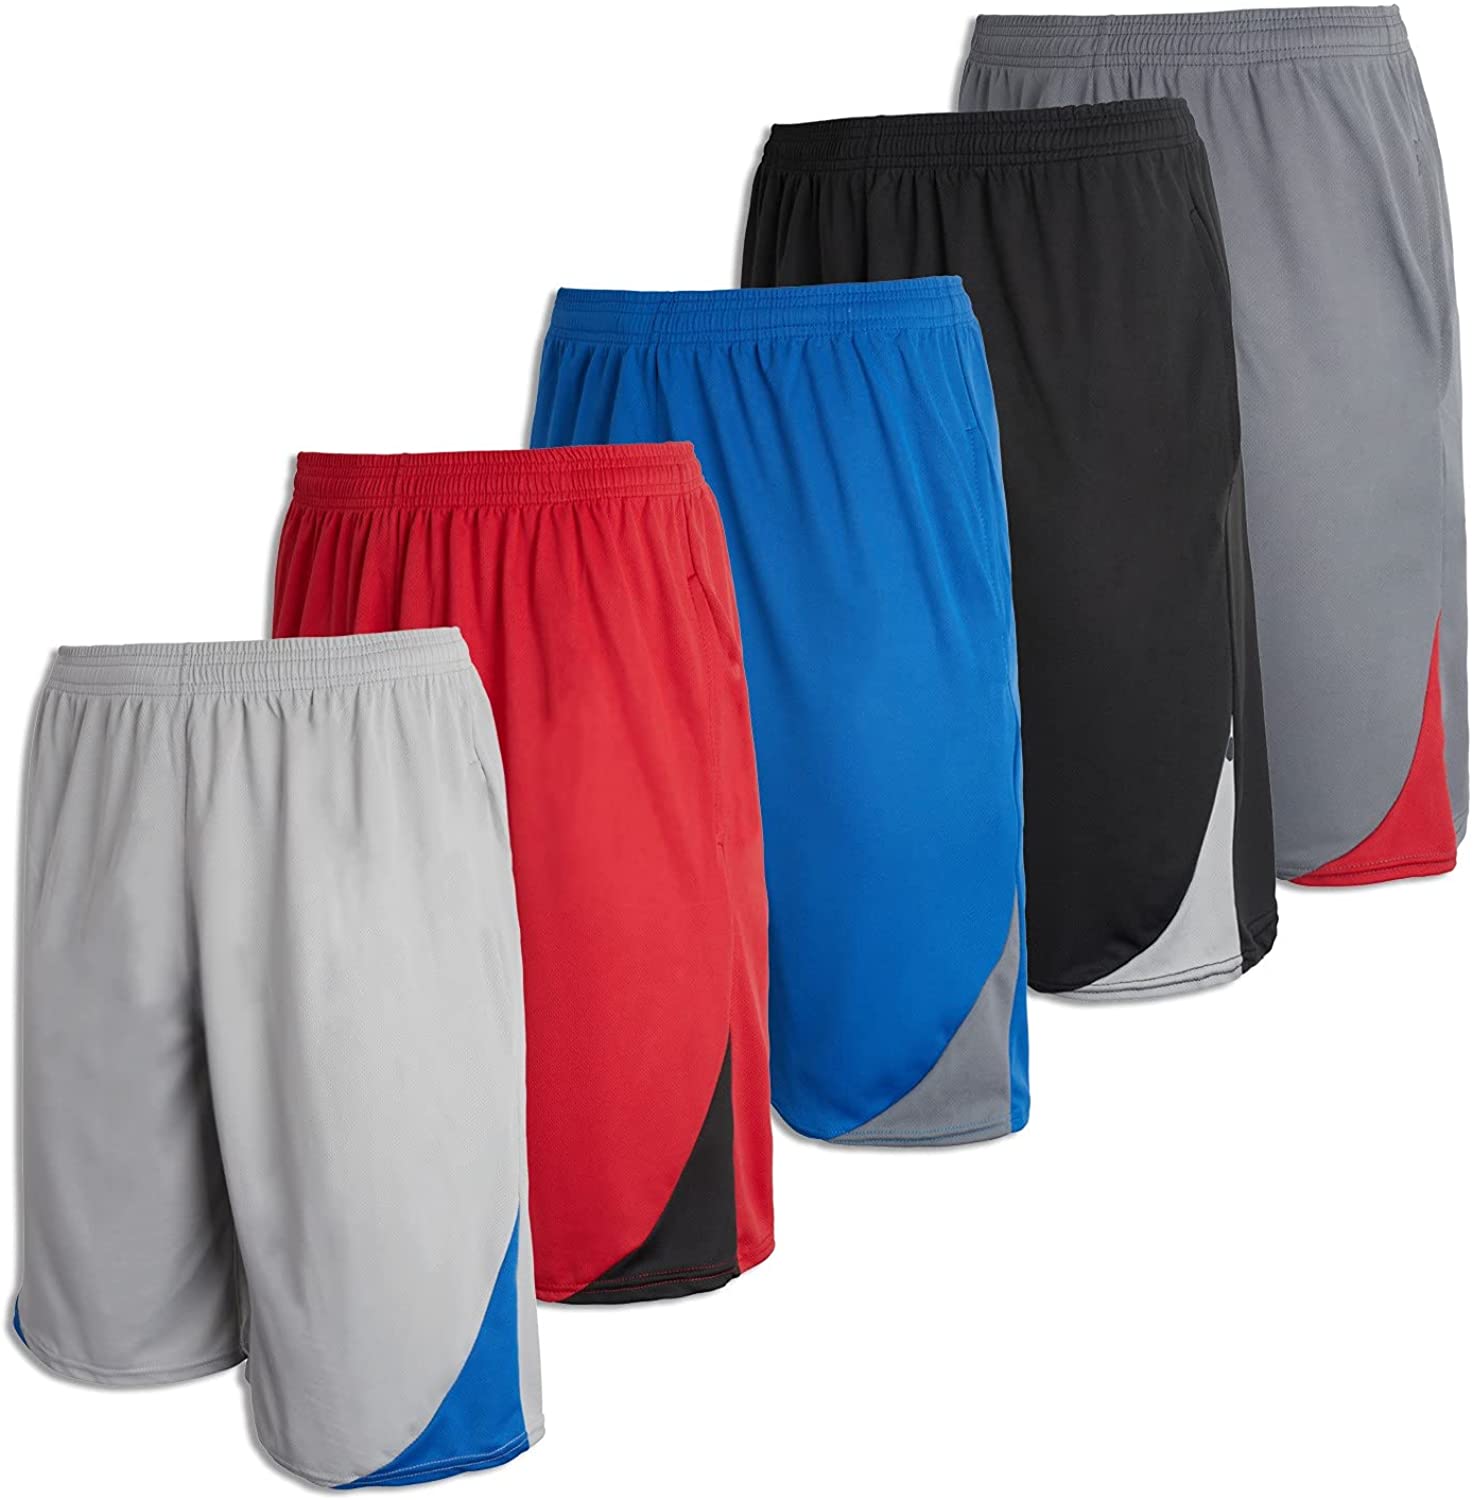 Essentials Boys' Active Performance Woven Soccer Shorts 